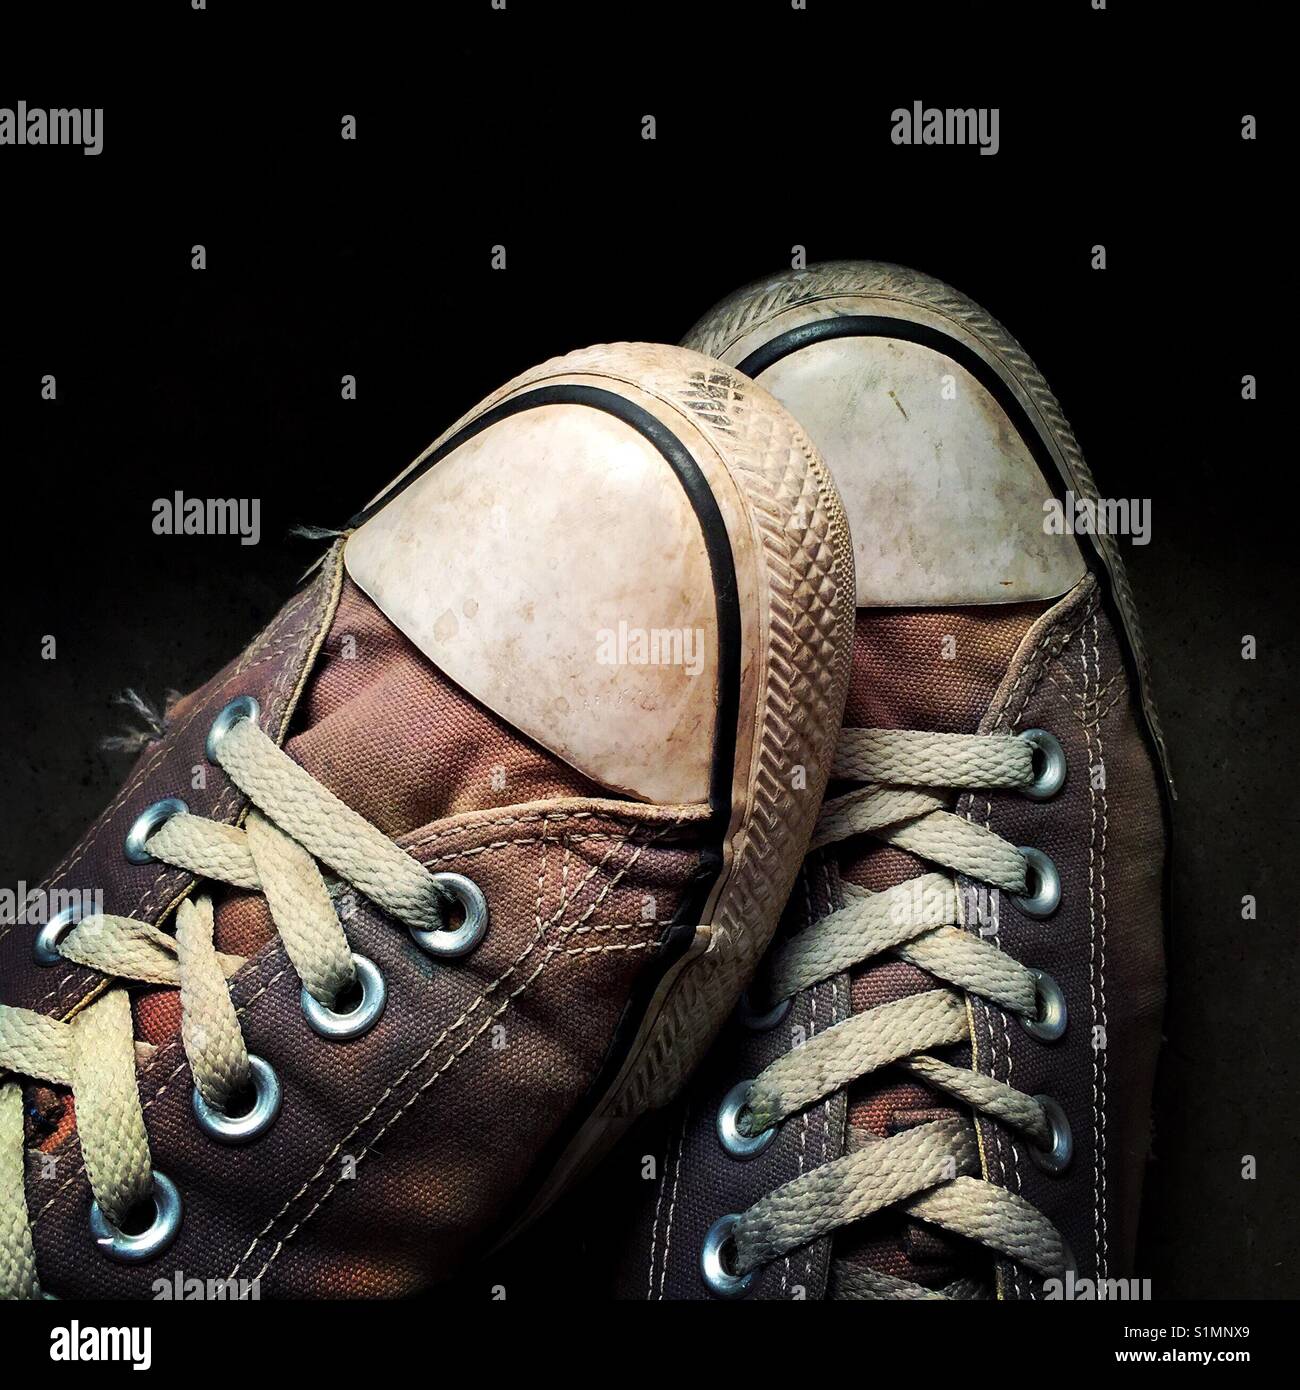 A moody close up detail shot of a pair of old worn out Converse sneakers  Stock Photo - Alamy